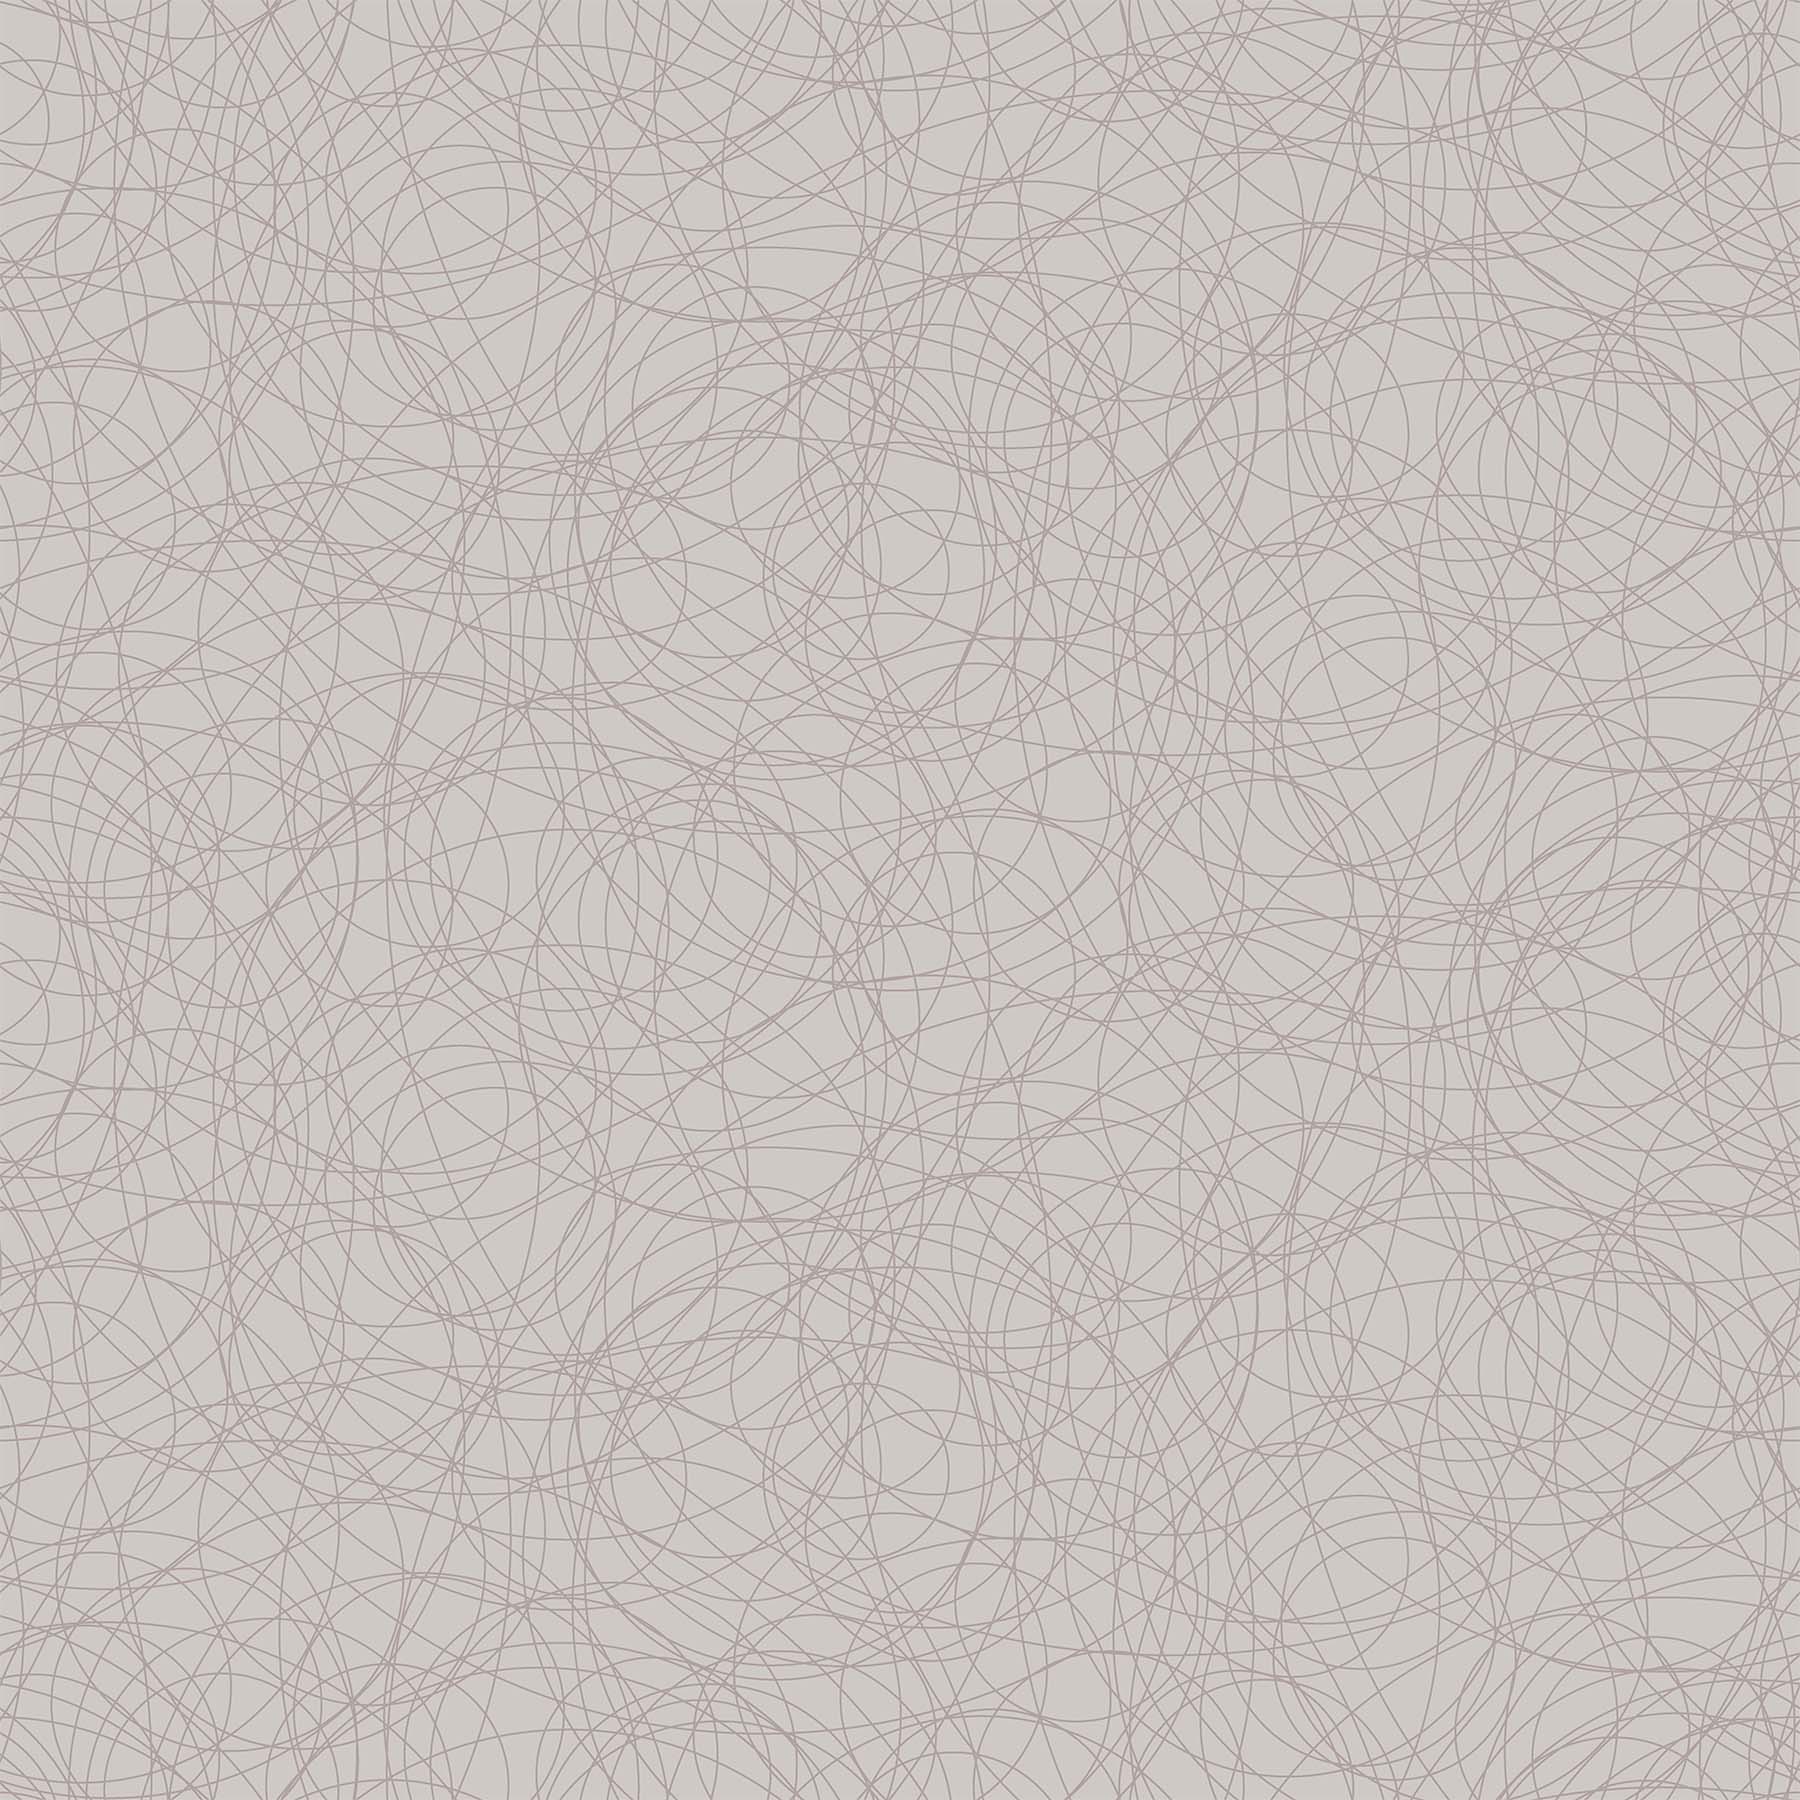 Neutrality Quilt Fabric - Round and Round in Gull - 10292-91